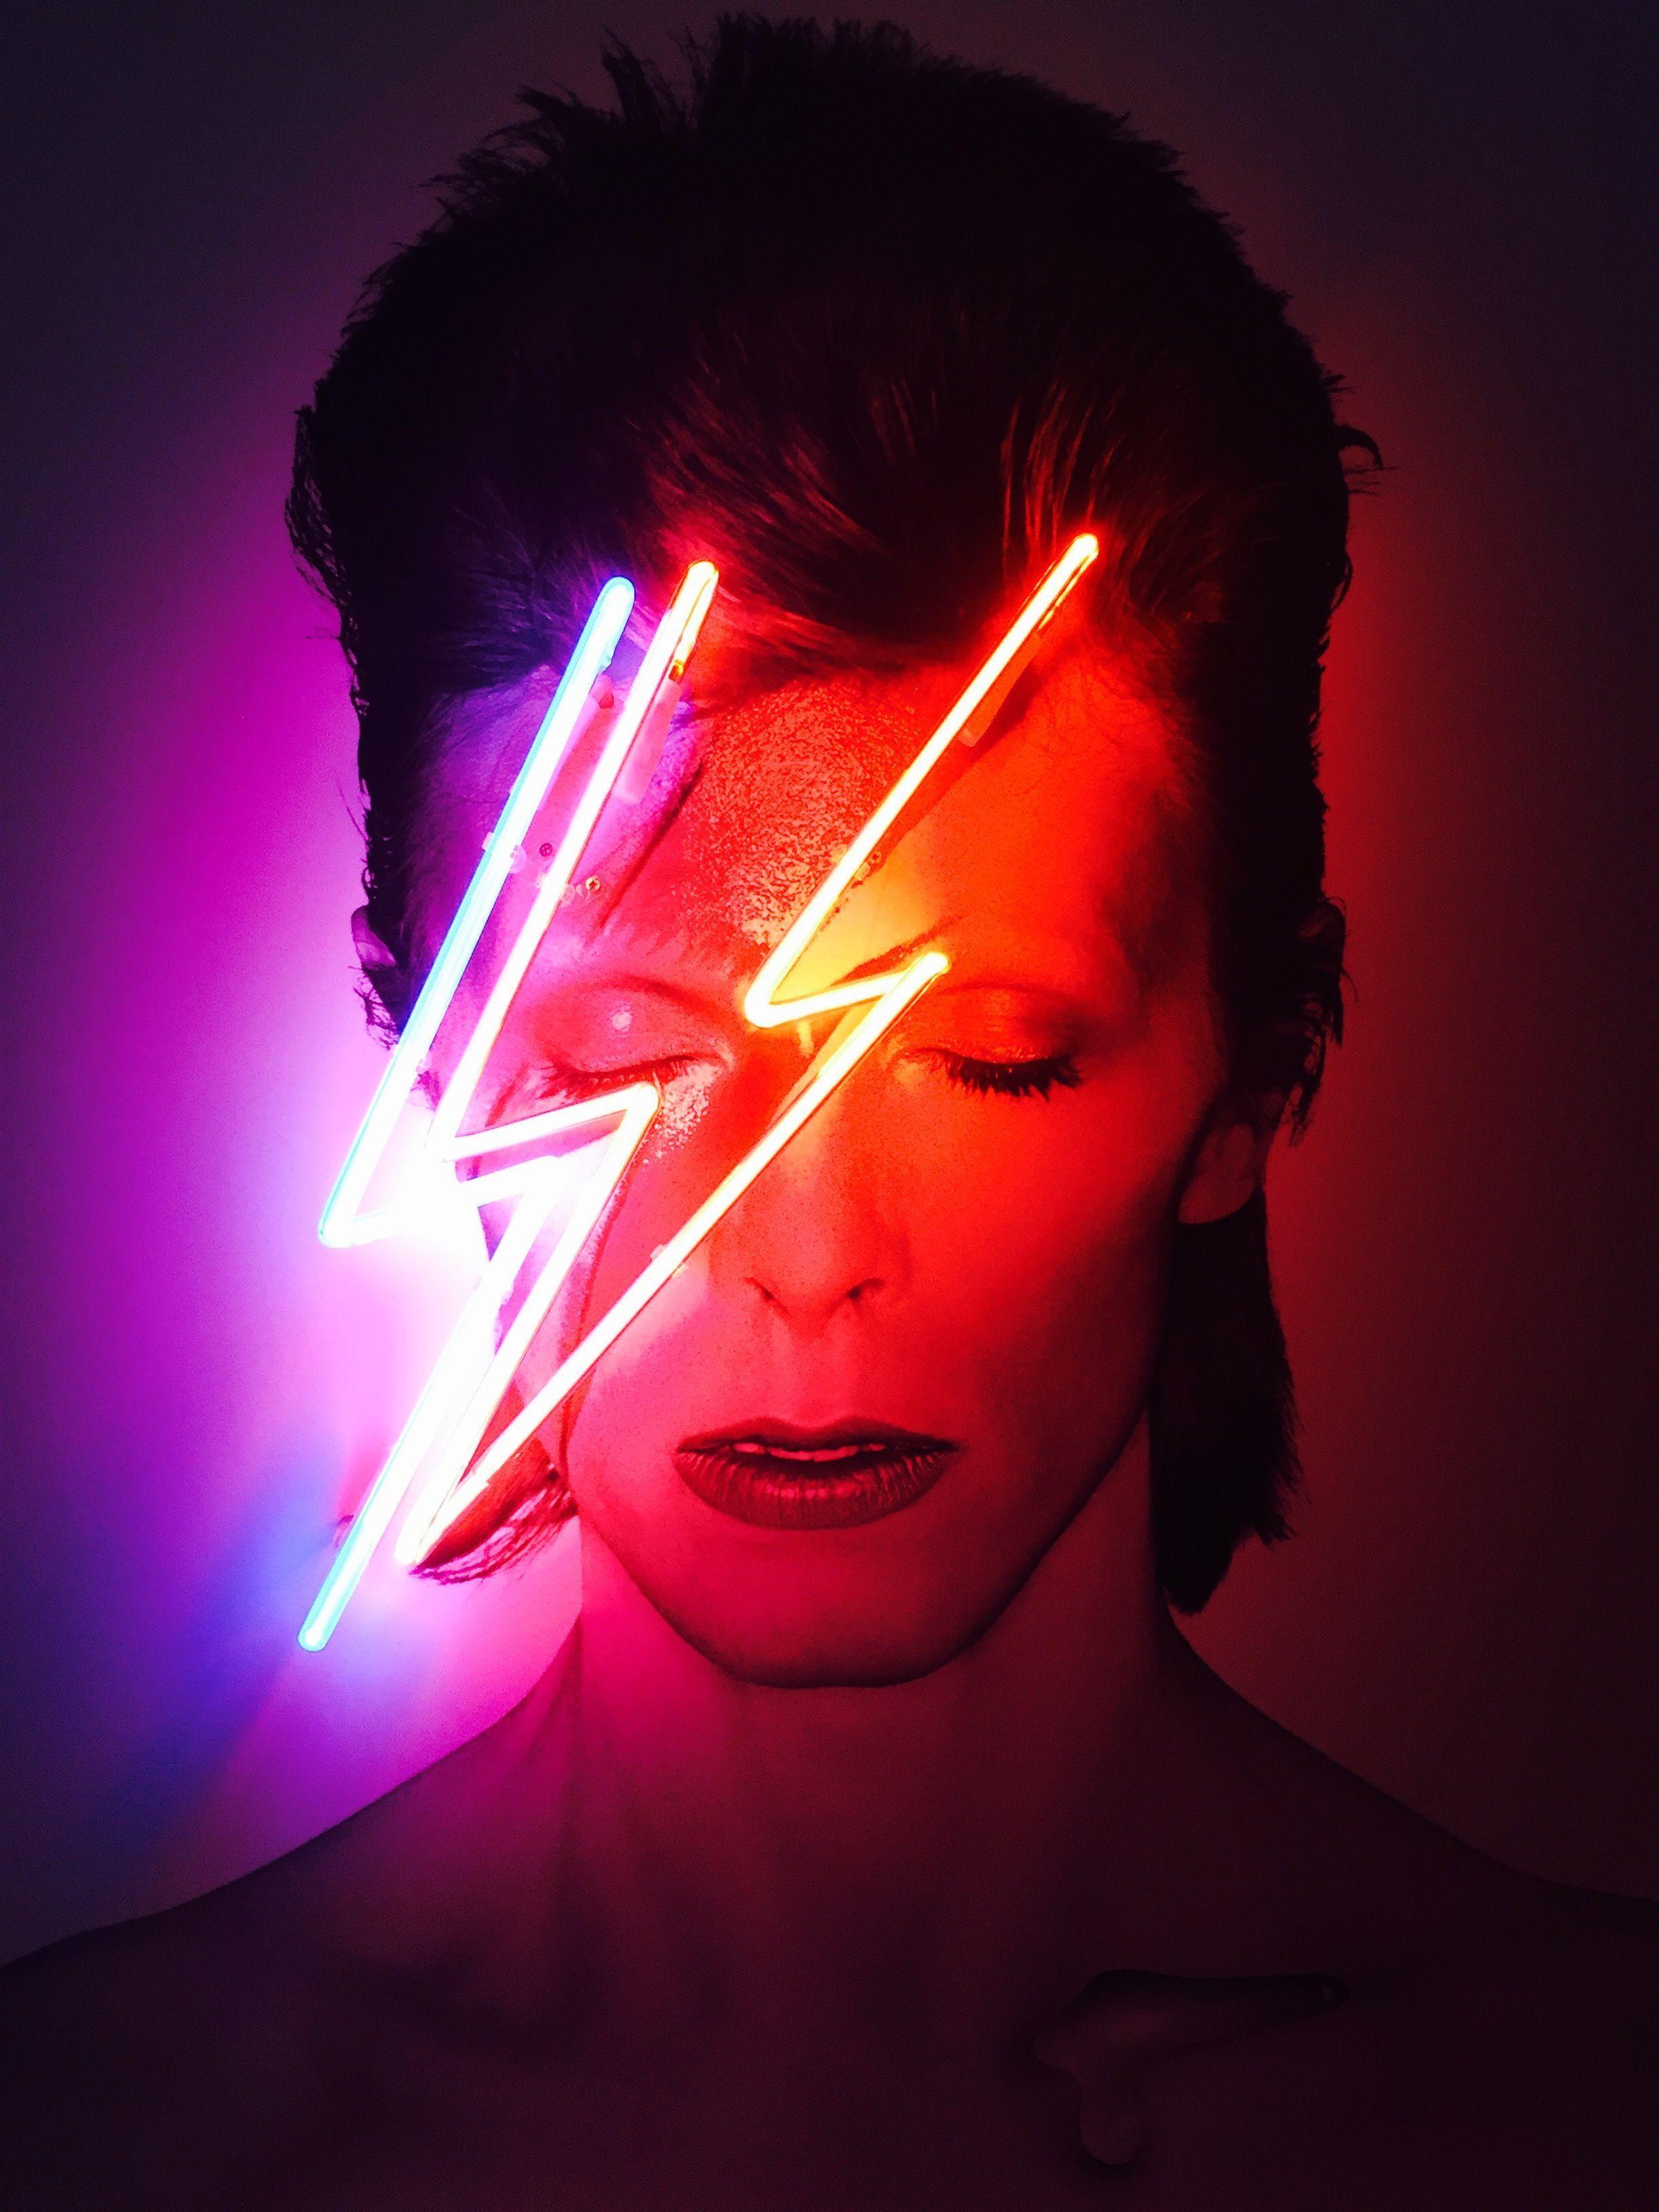 Top More Than 60 David Bowie Wallpaper Best Incdgdbentre 8830